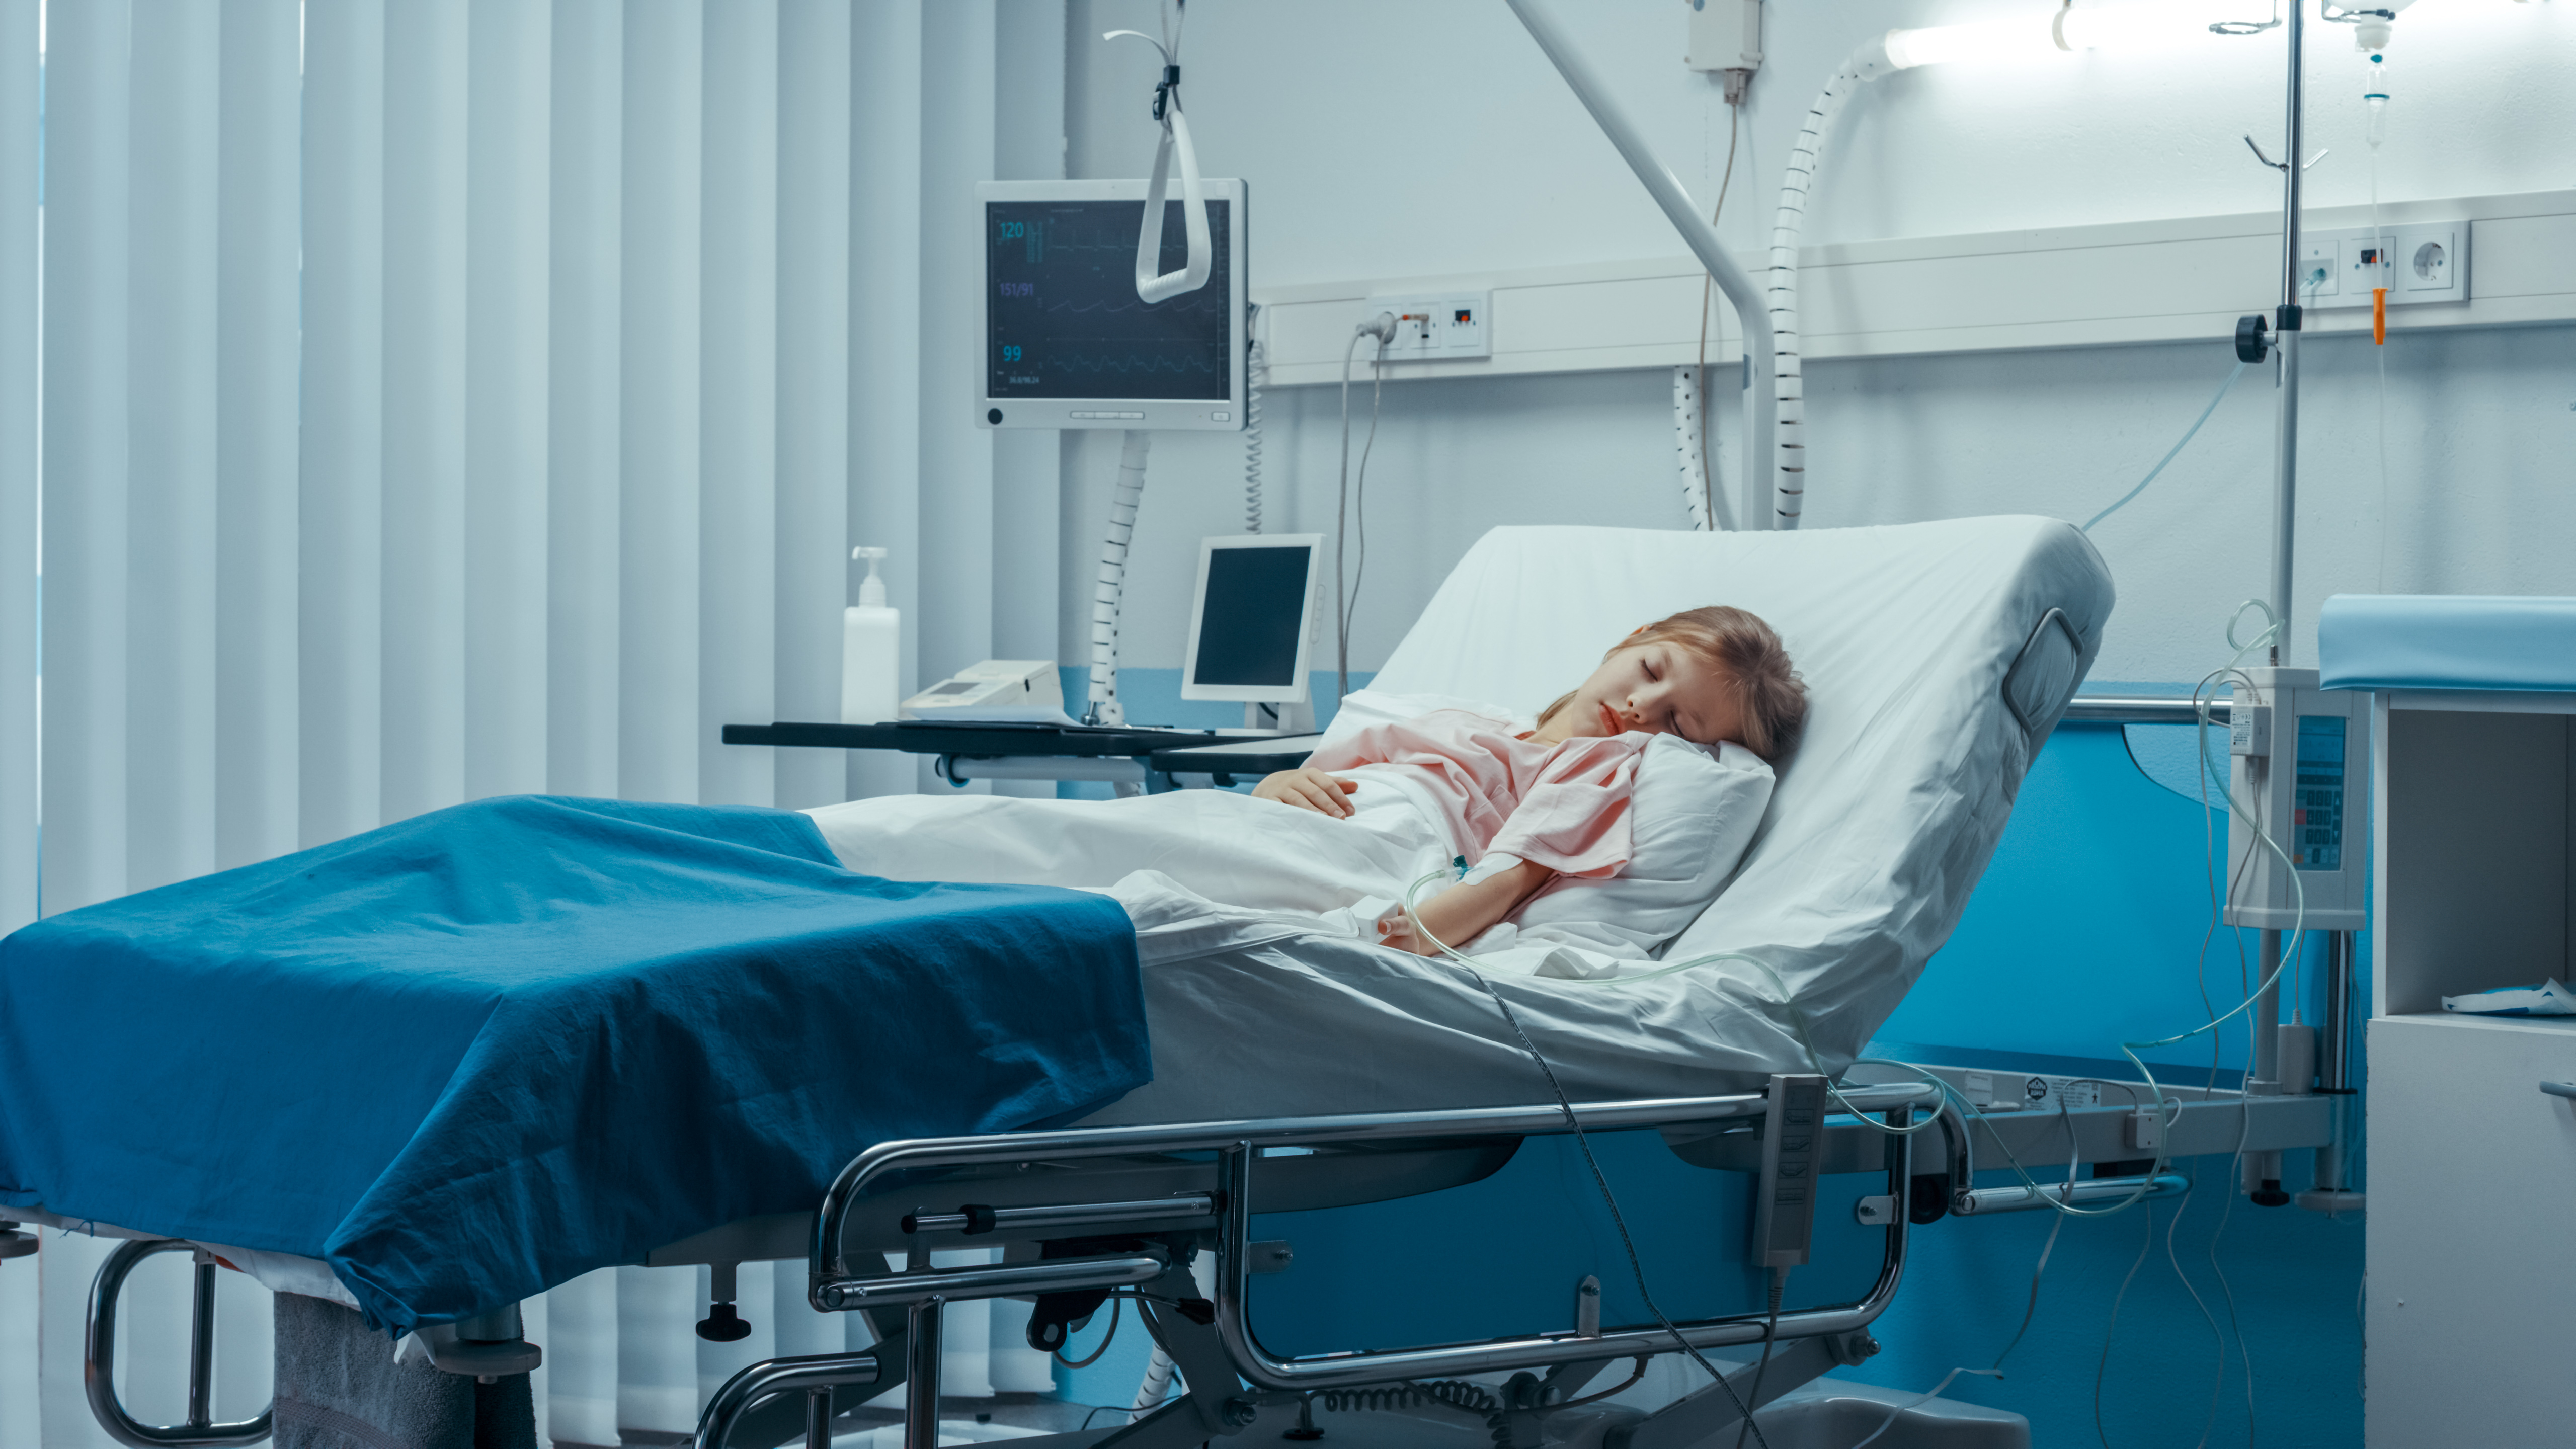 Sick girl sleeps on a bed in the children's hospital | Source: Shutterstock.com